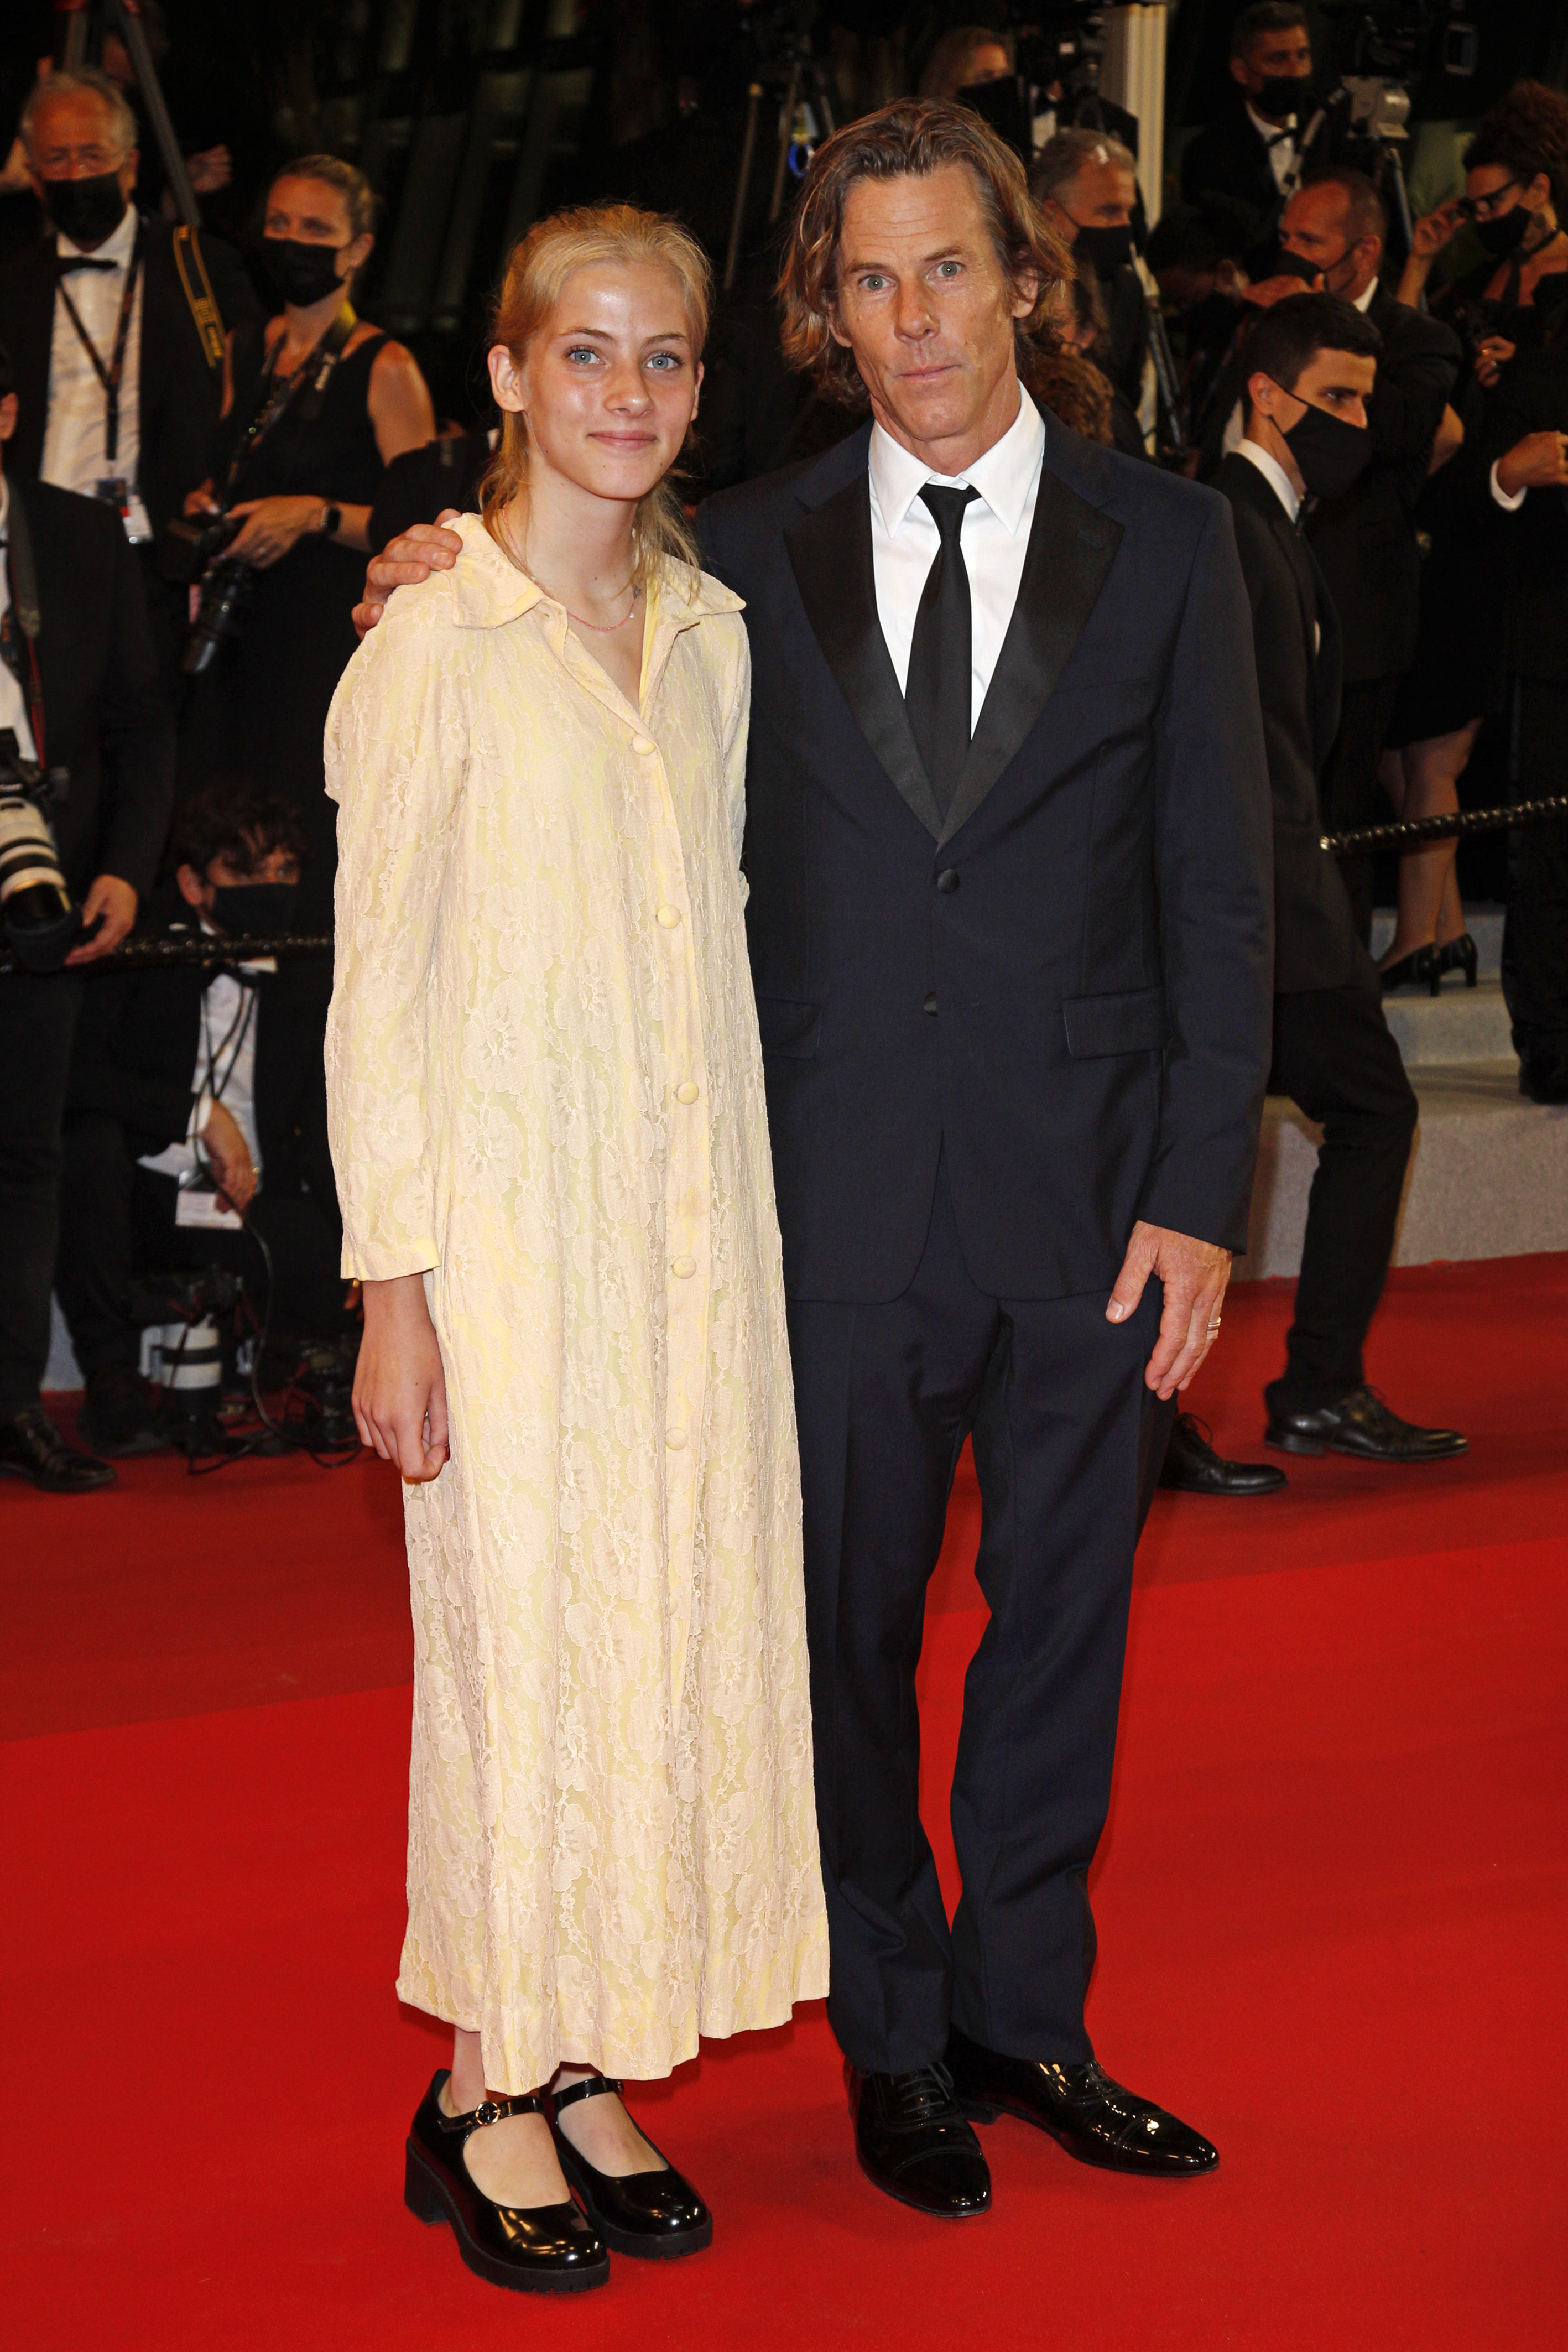 Hazel and Daniel Moder at the 74th Cannes Film Festival on July 10, 2021 | Source: Getty Images